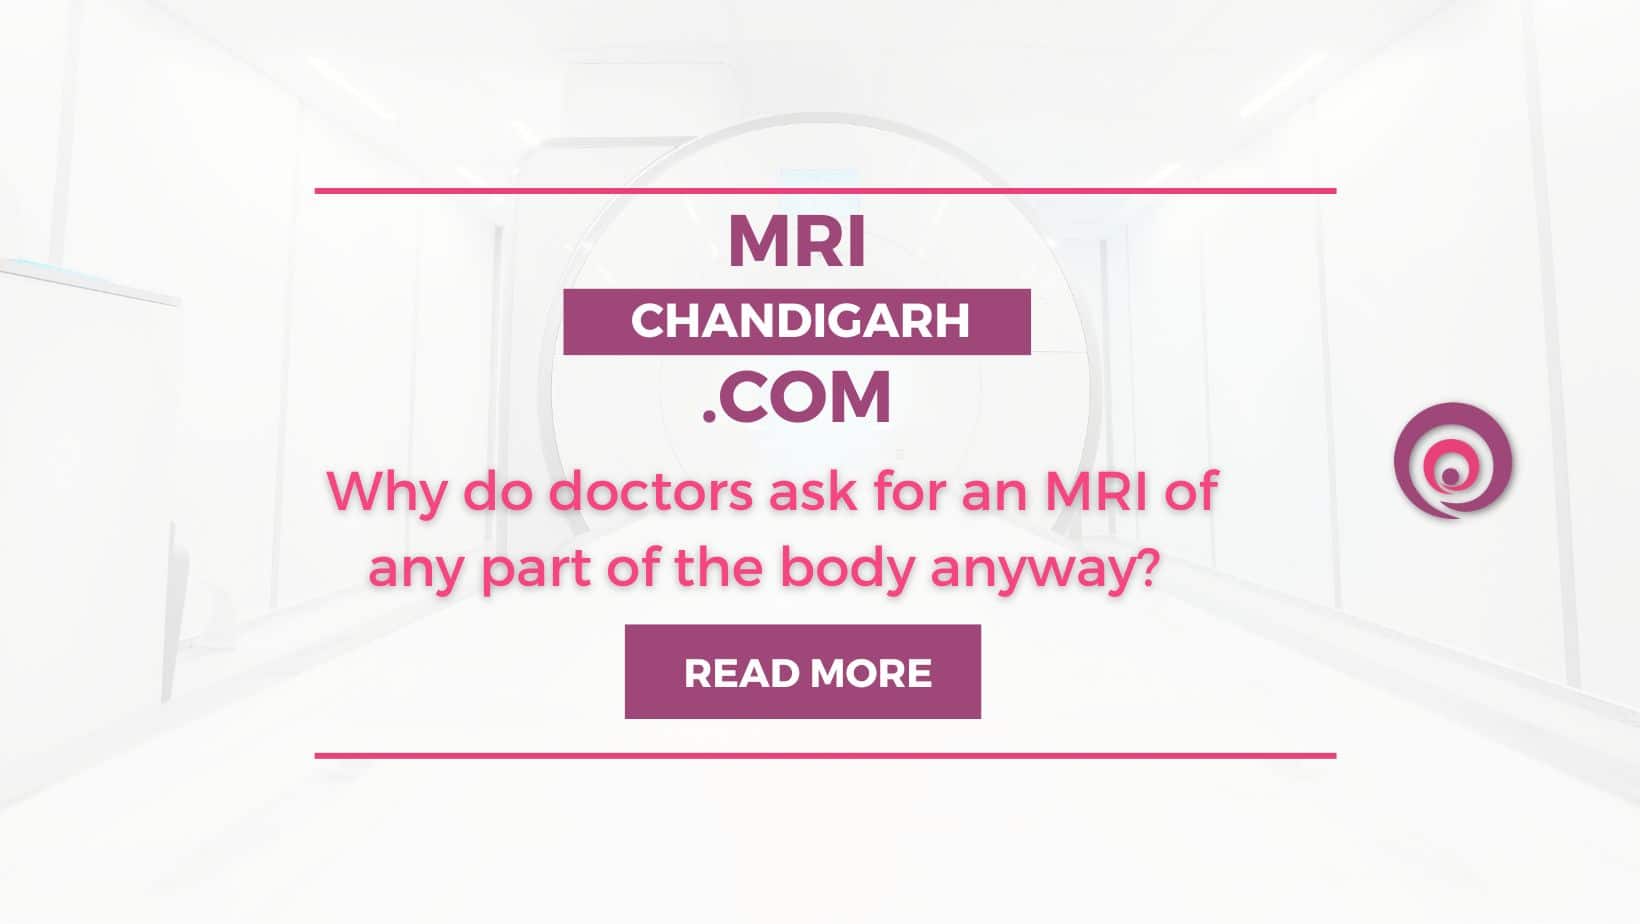 Why Do Doctors Ask For MRI Of Any Part Of The Body Anyway?